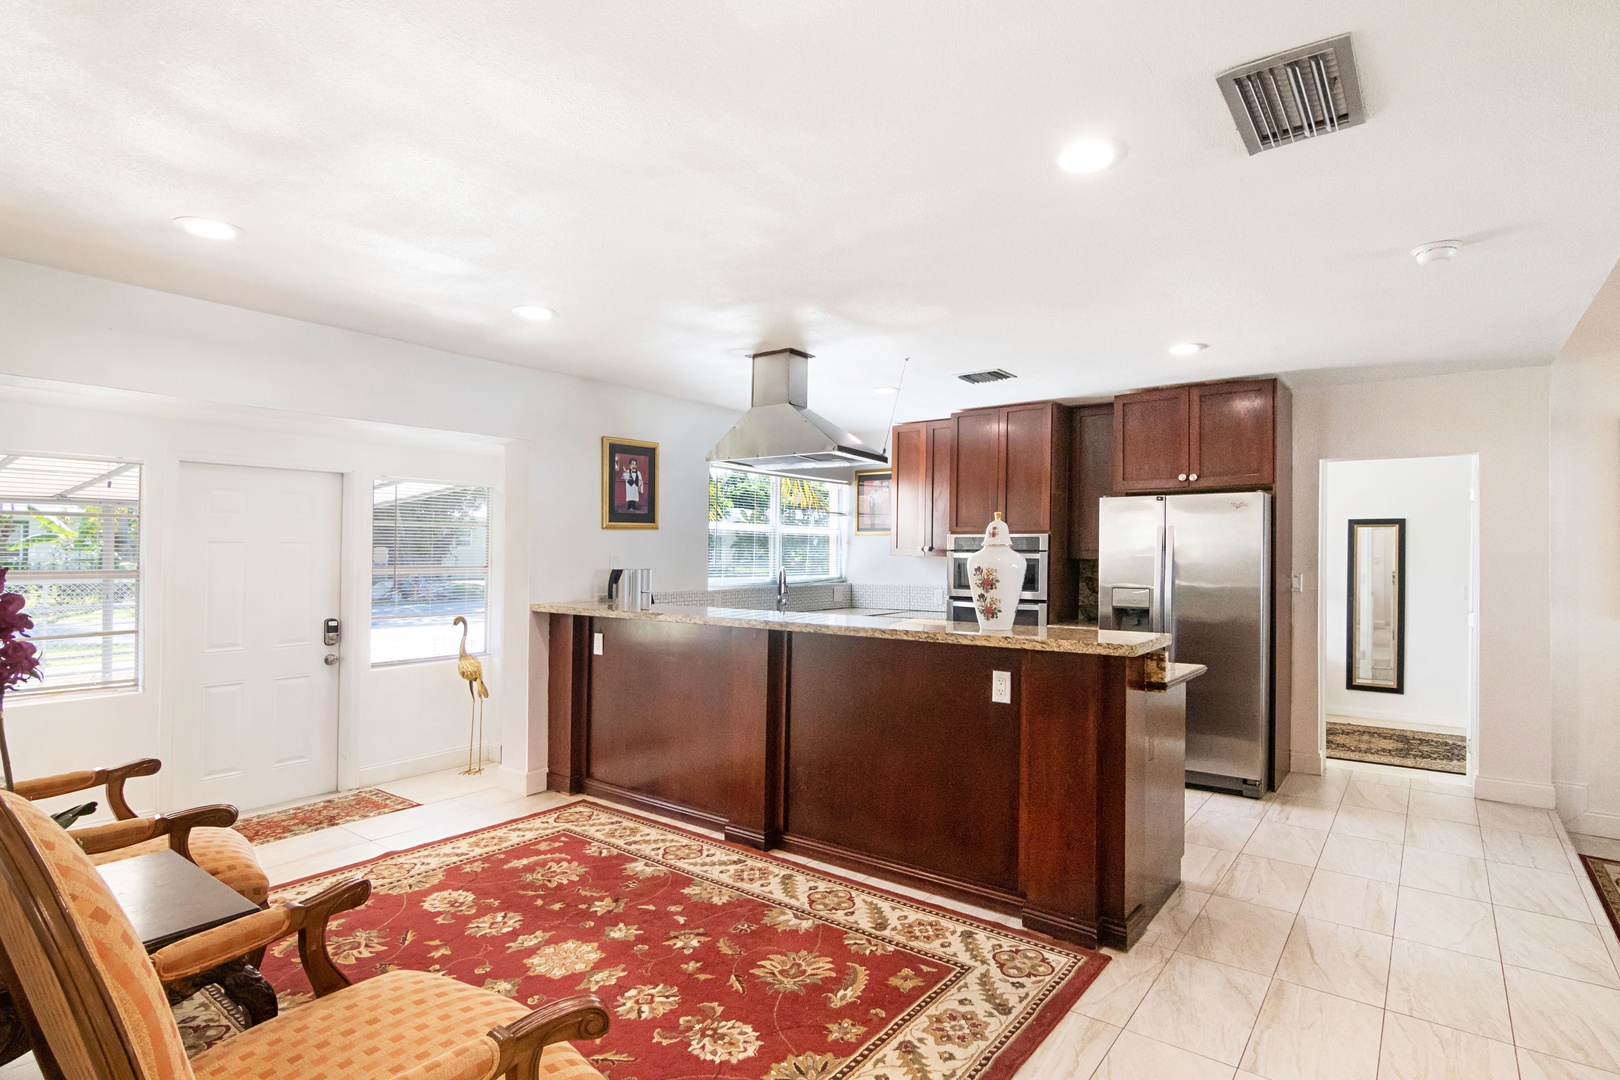 Fully equipped kitchen with ample counterspace to prep your meals!